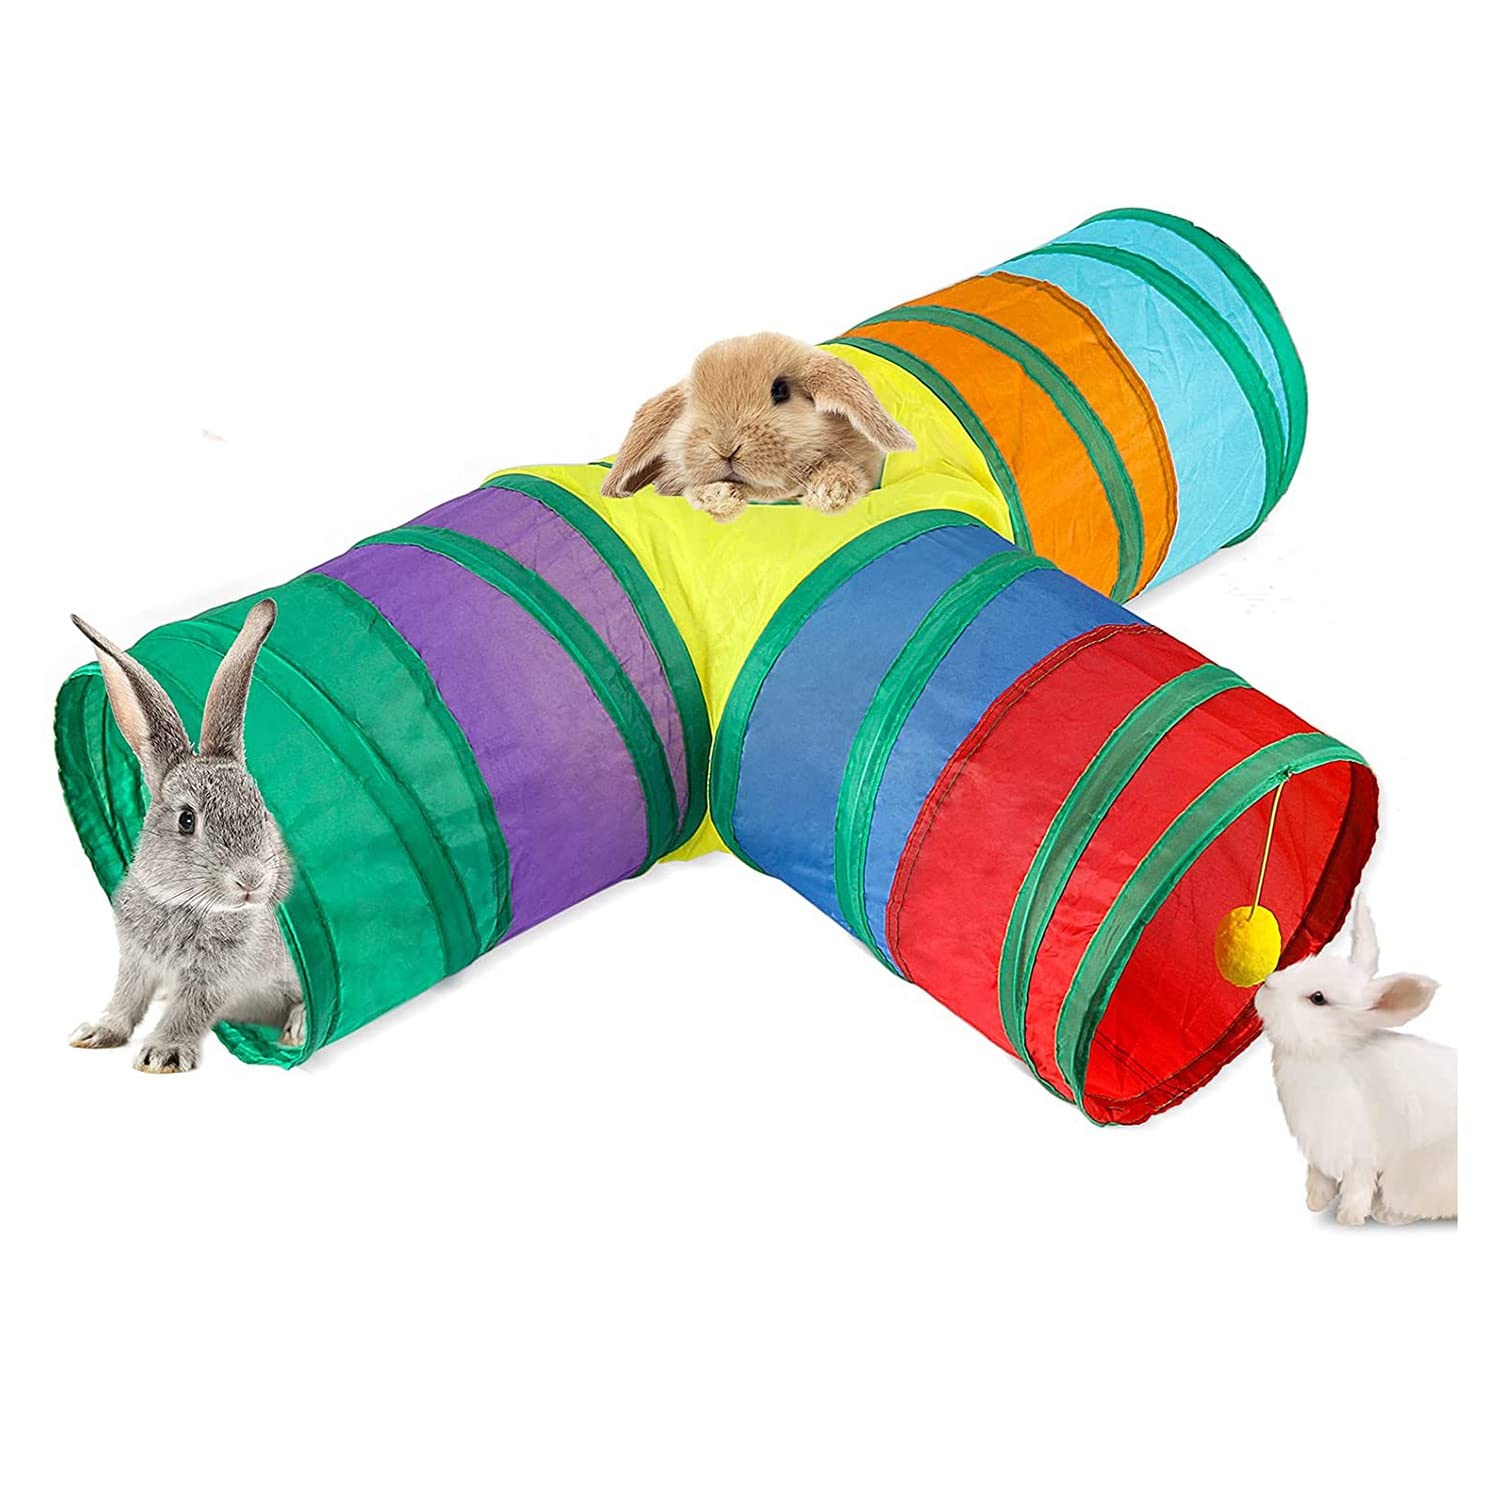 Qeunrtiy Bunny & Tubes Collapsible 3-Way Bunny Hideout Small Animal  Activity Tunnel Toy for Dwarf Rabbits Bunny Kittens